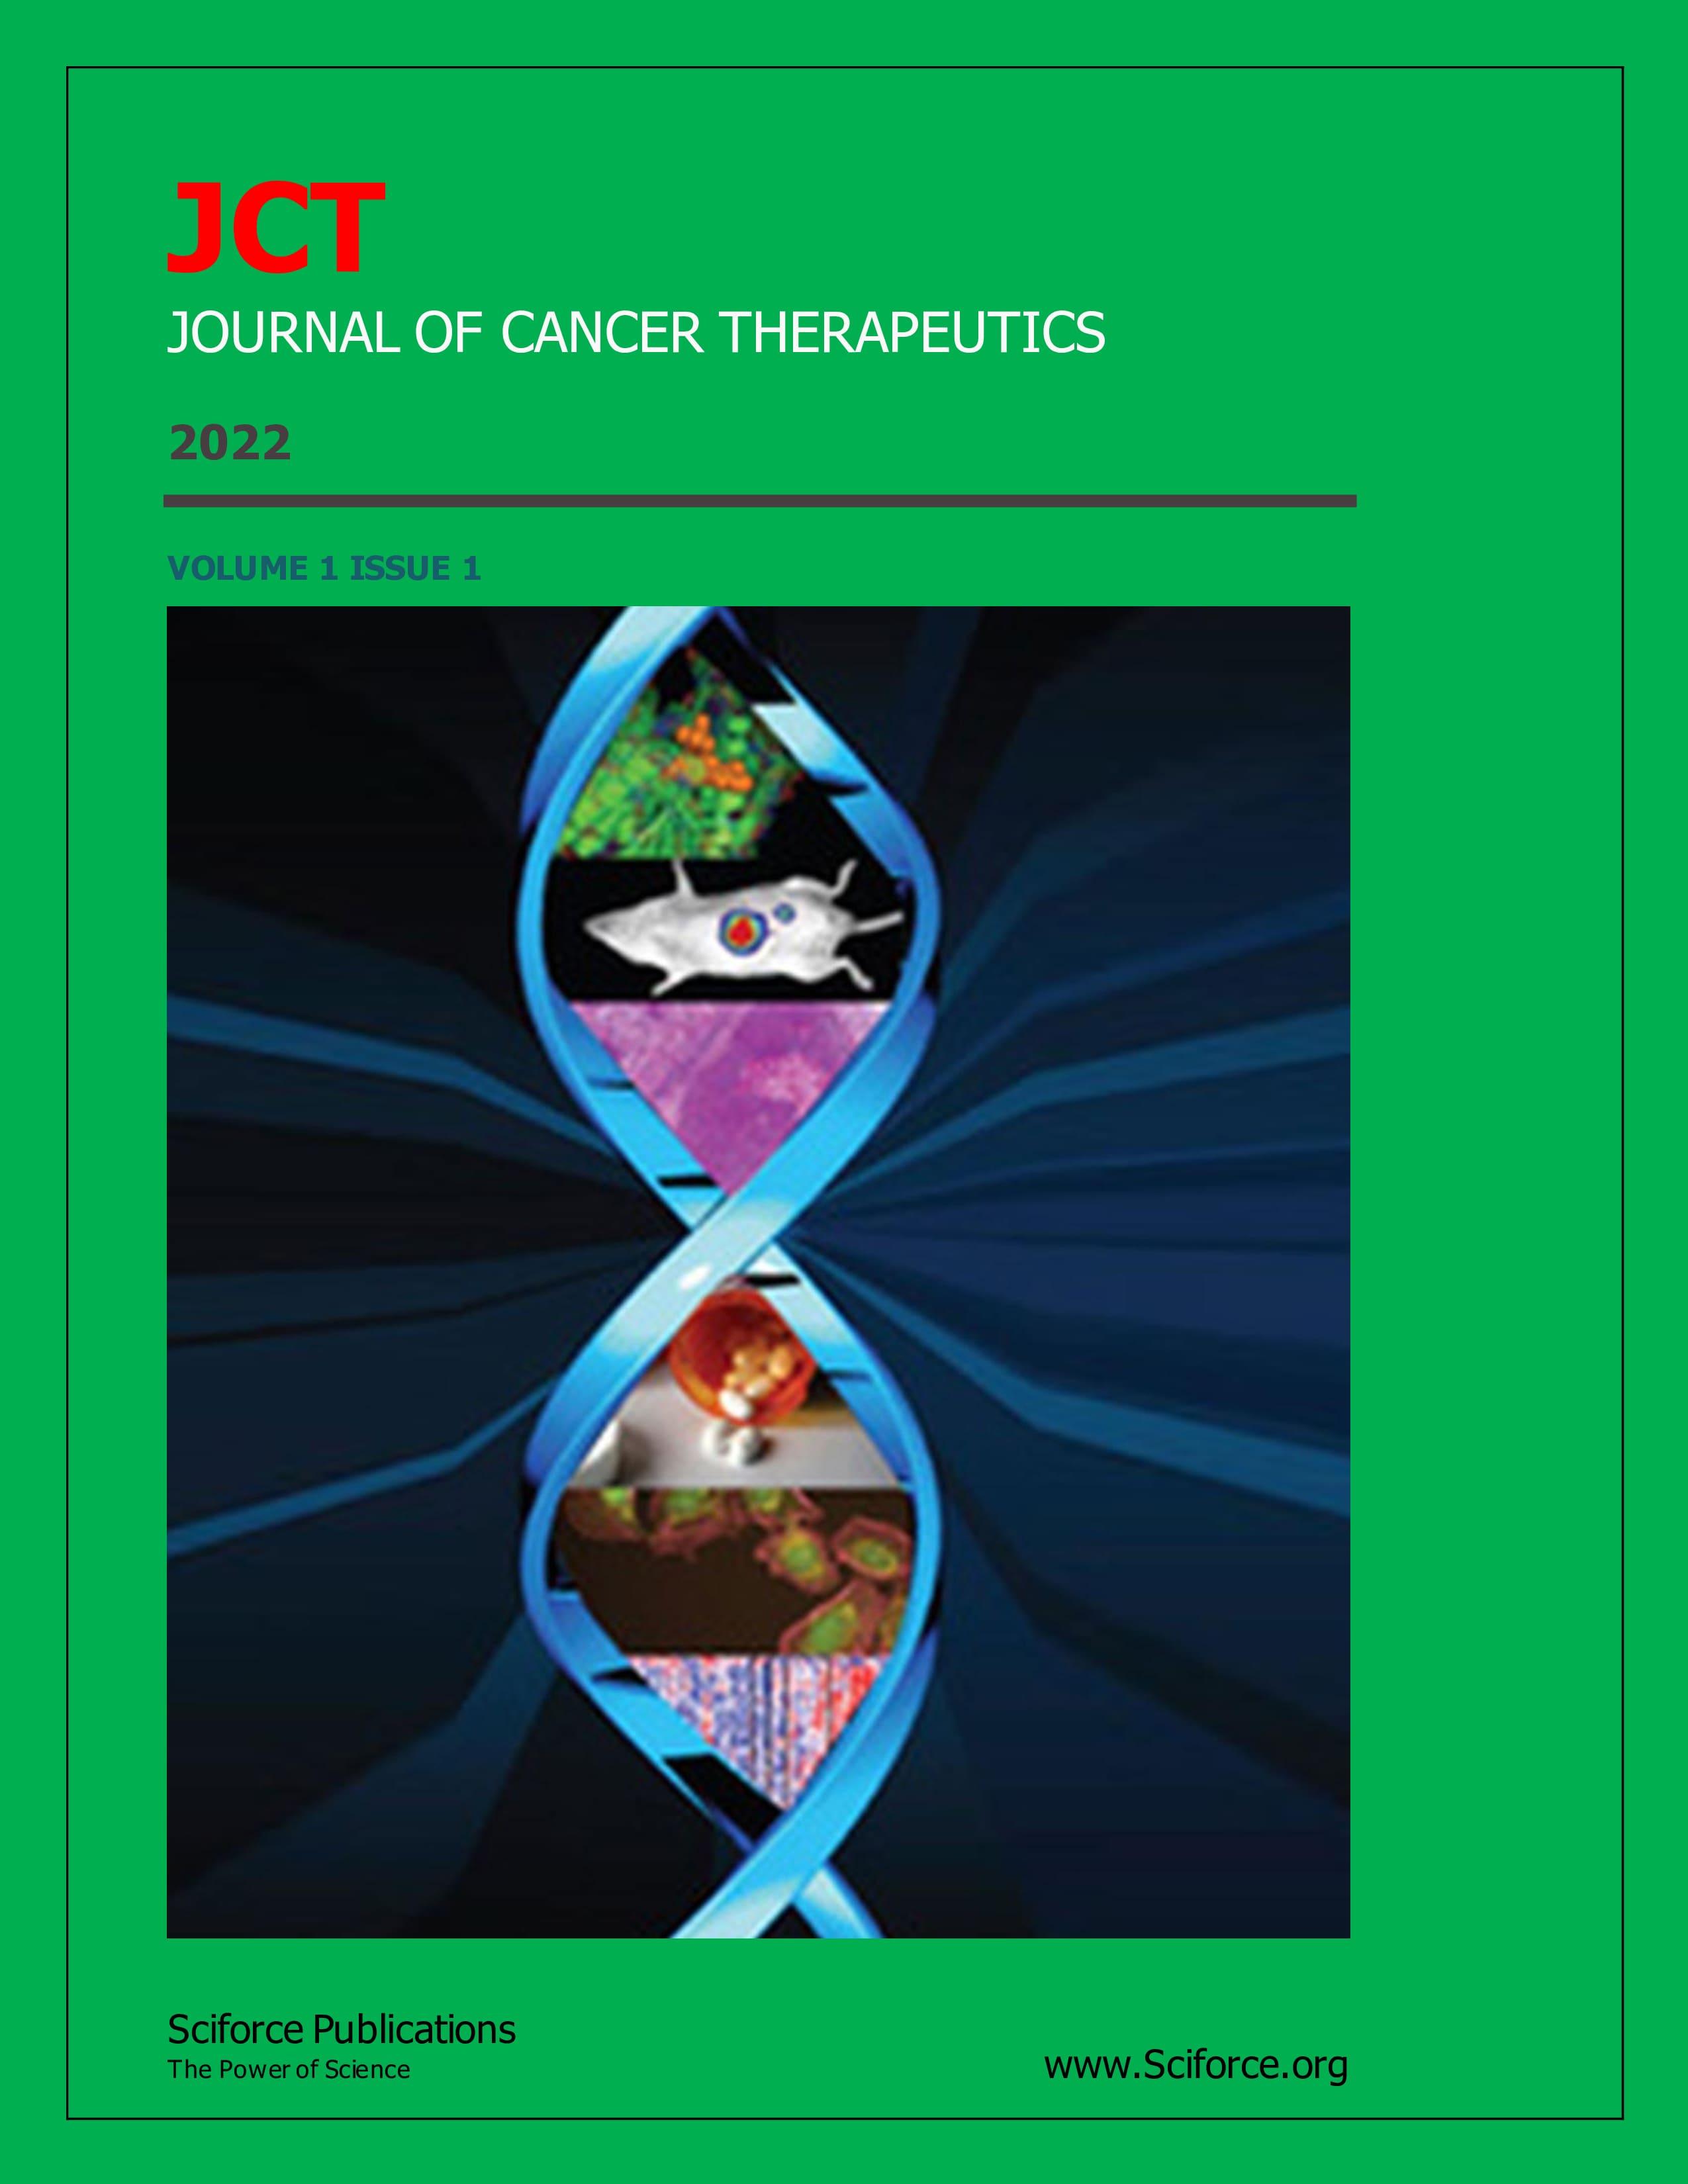 Journal of Cancer Therapeutics